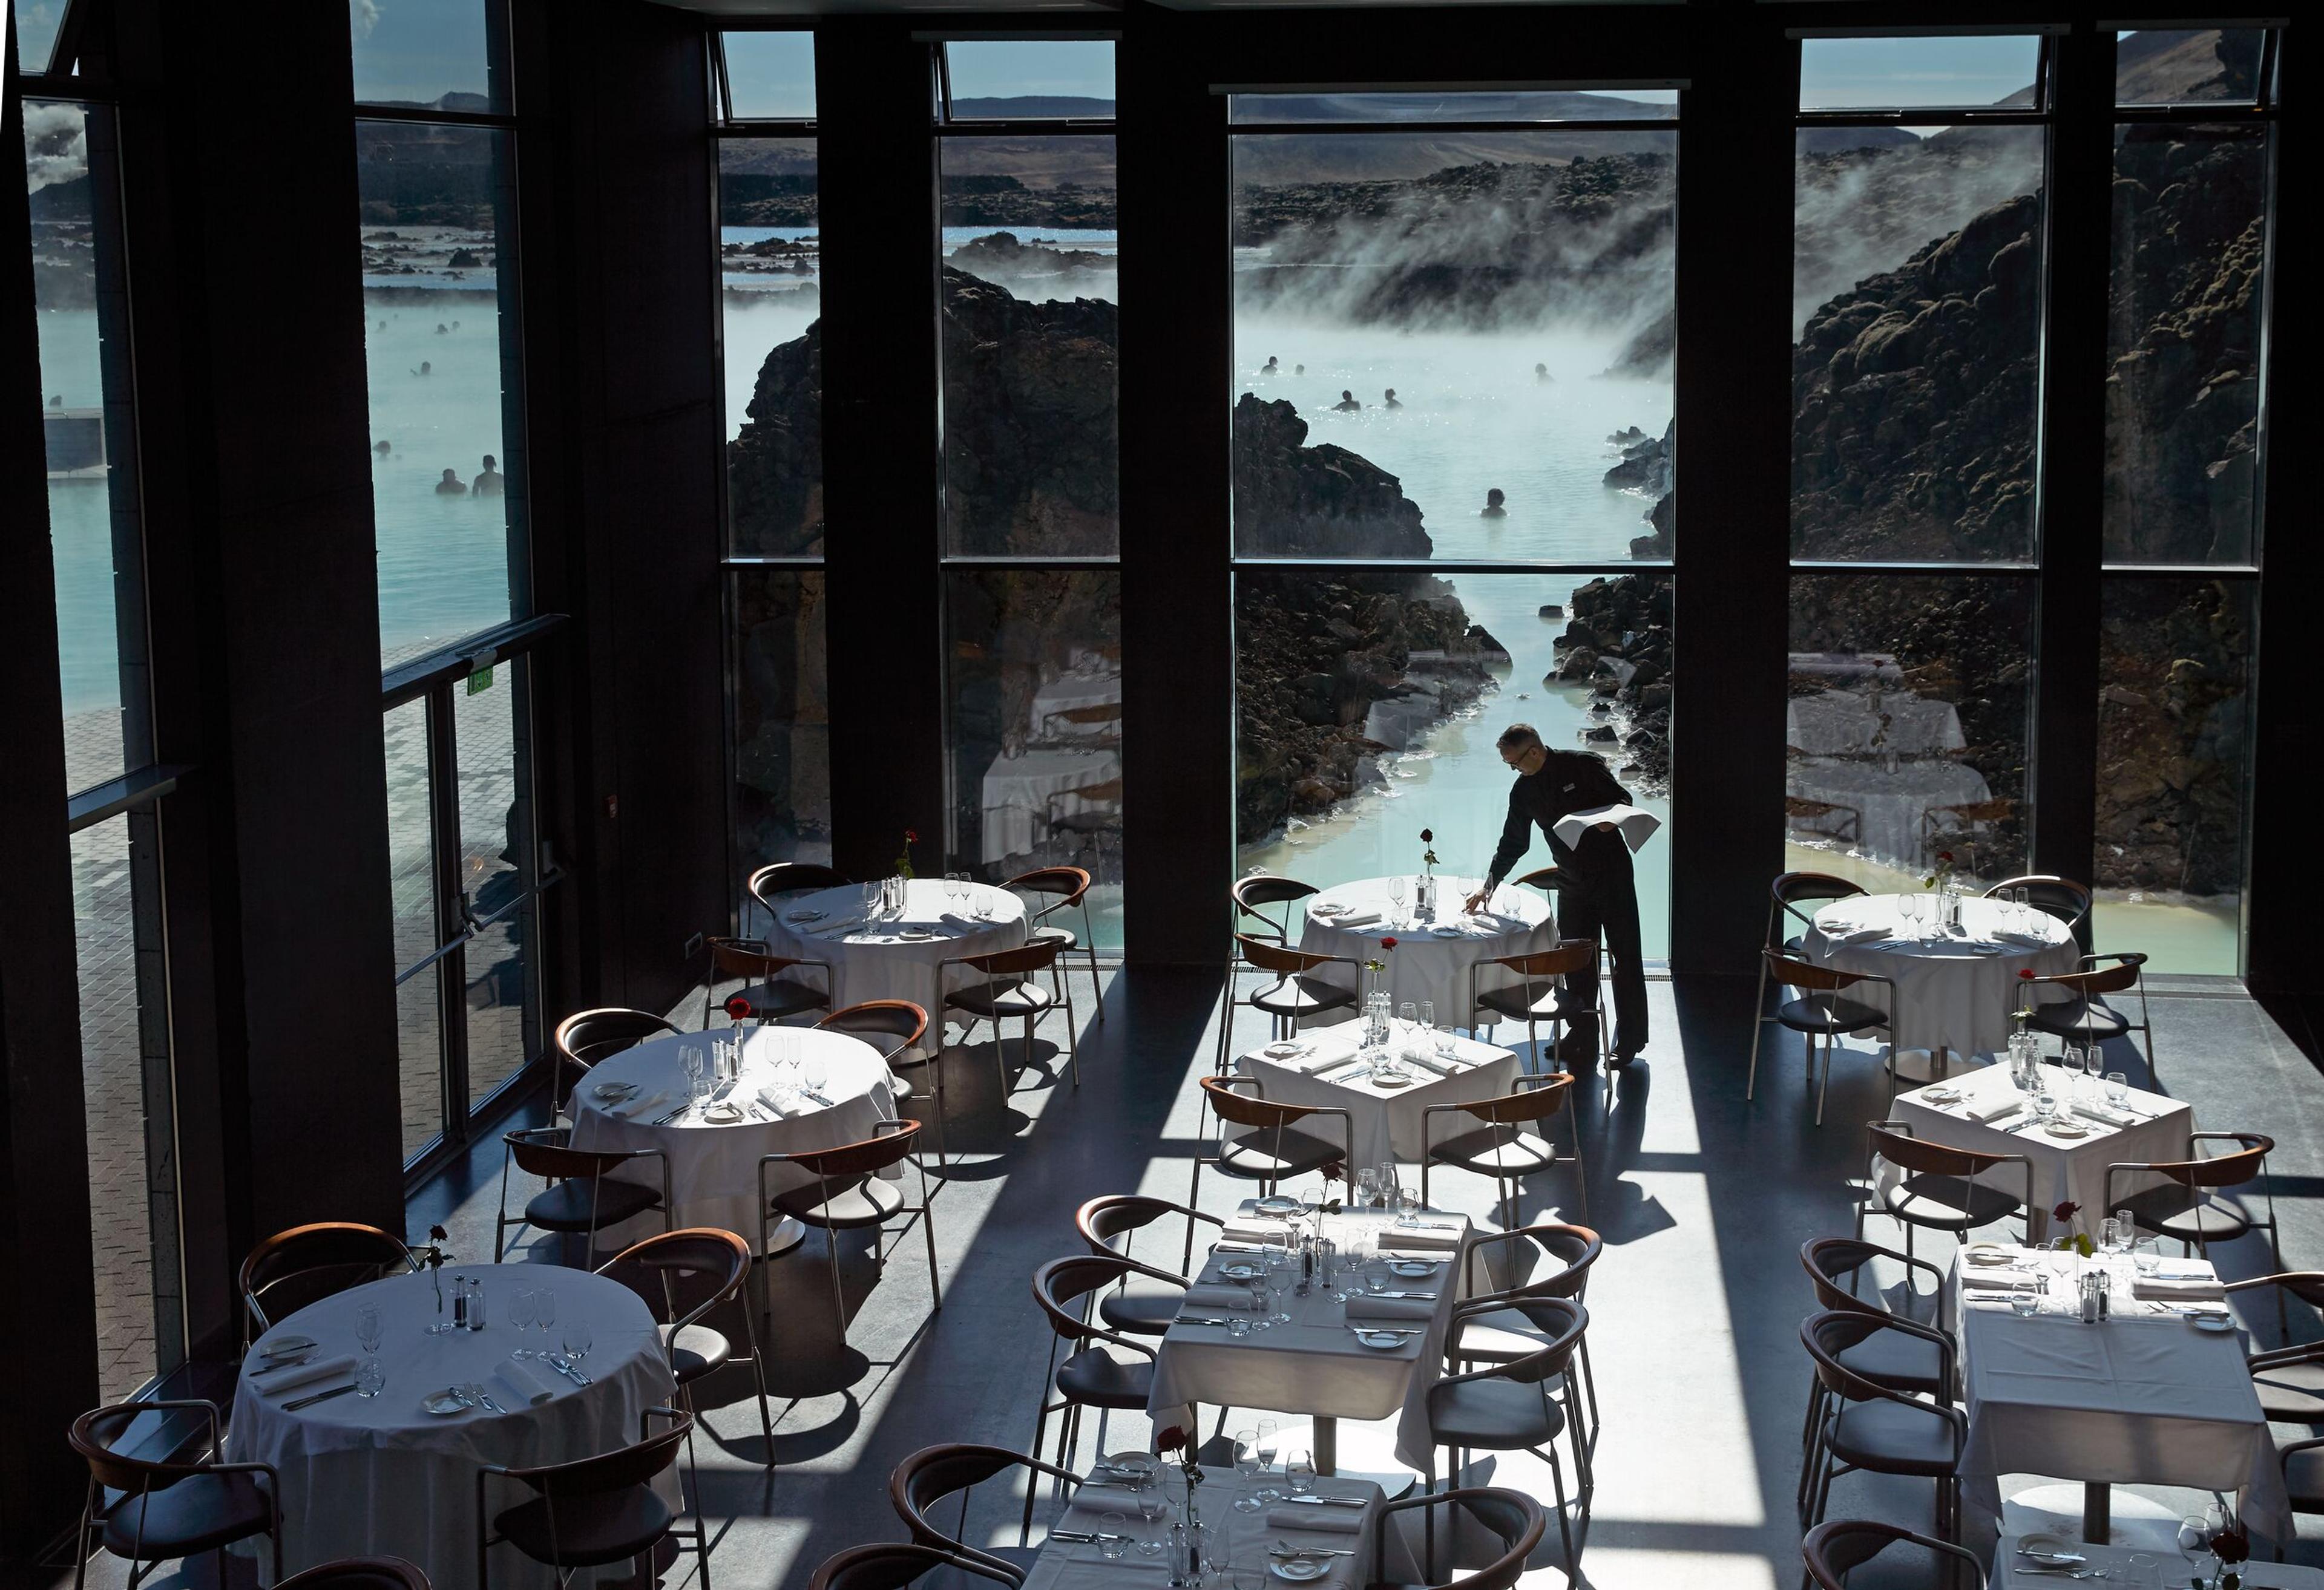 A waiter sets up tables for dinner service, while behind large windows, guests enjoy a swim in the lagoon.